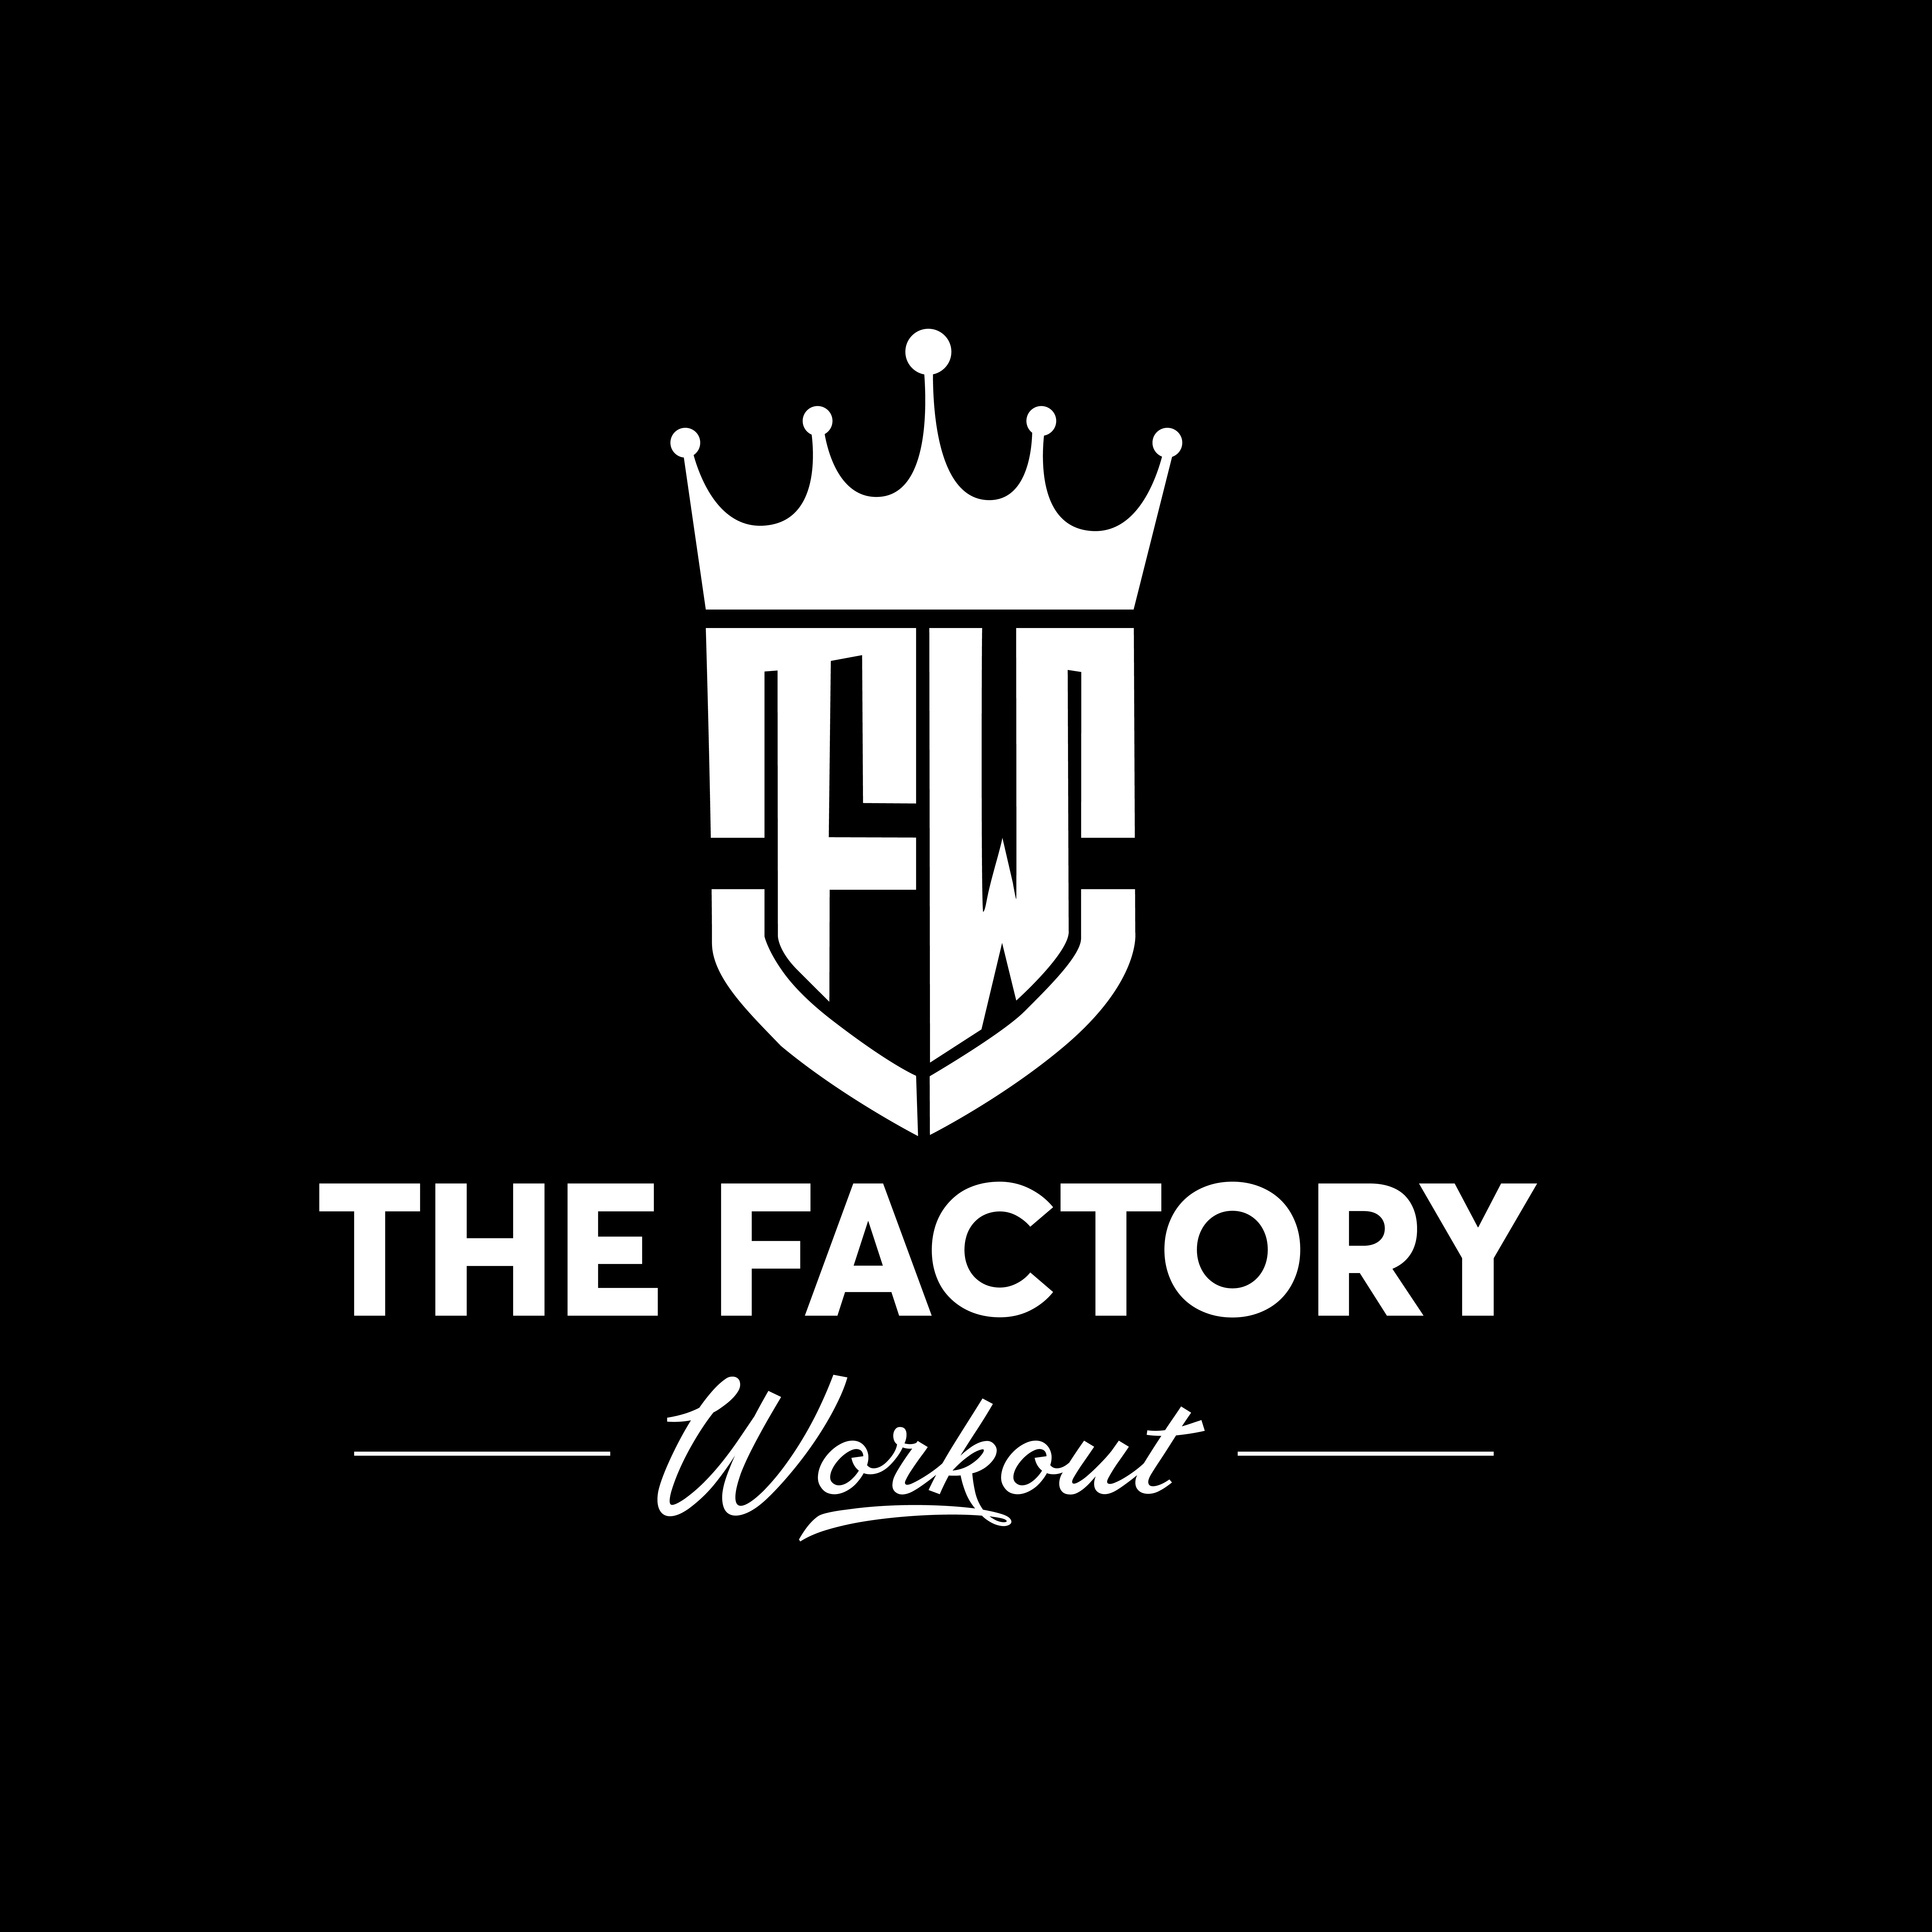 The Factory Workout Logo 01